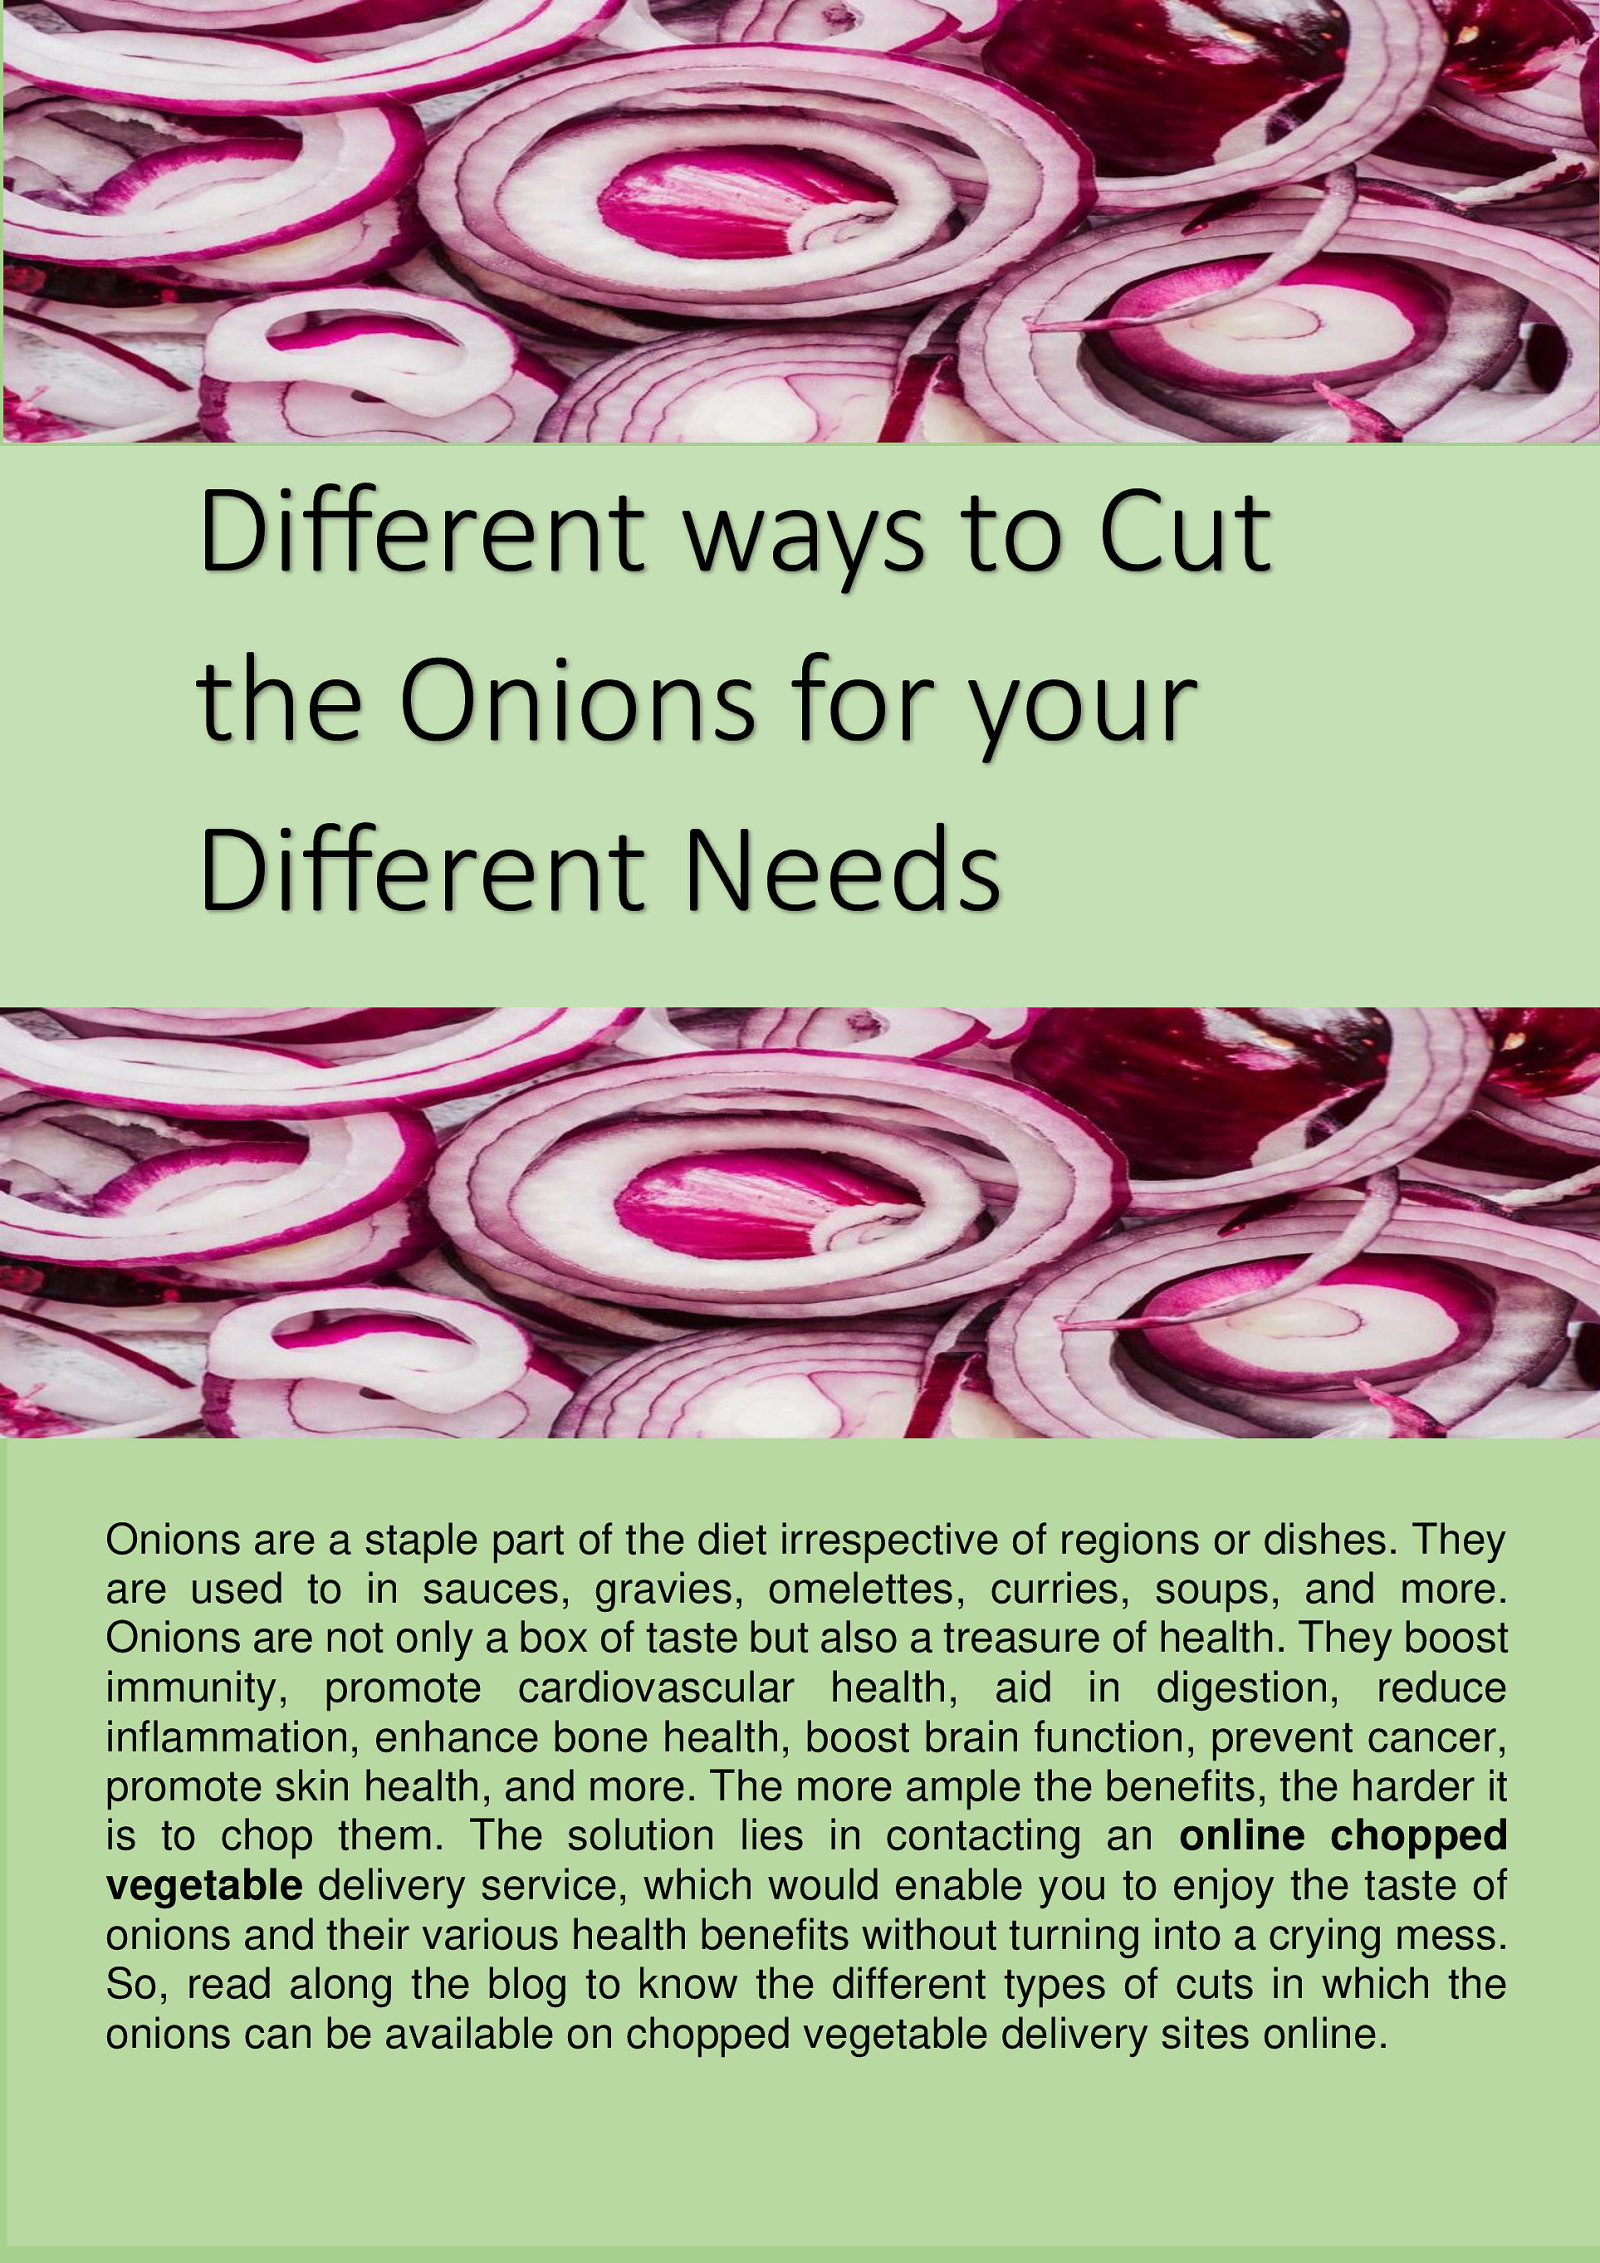 Different ways to Cut the Onions for your Different Needs